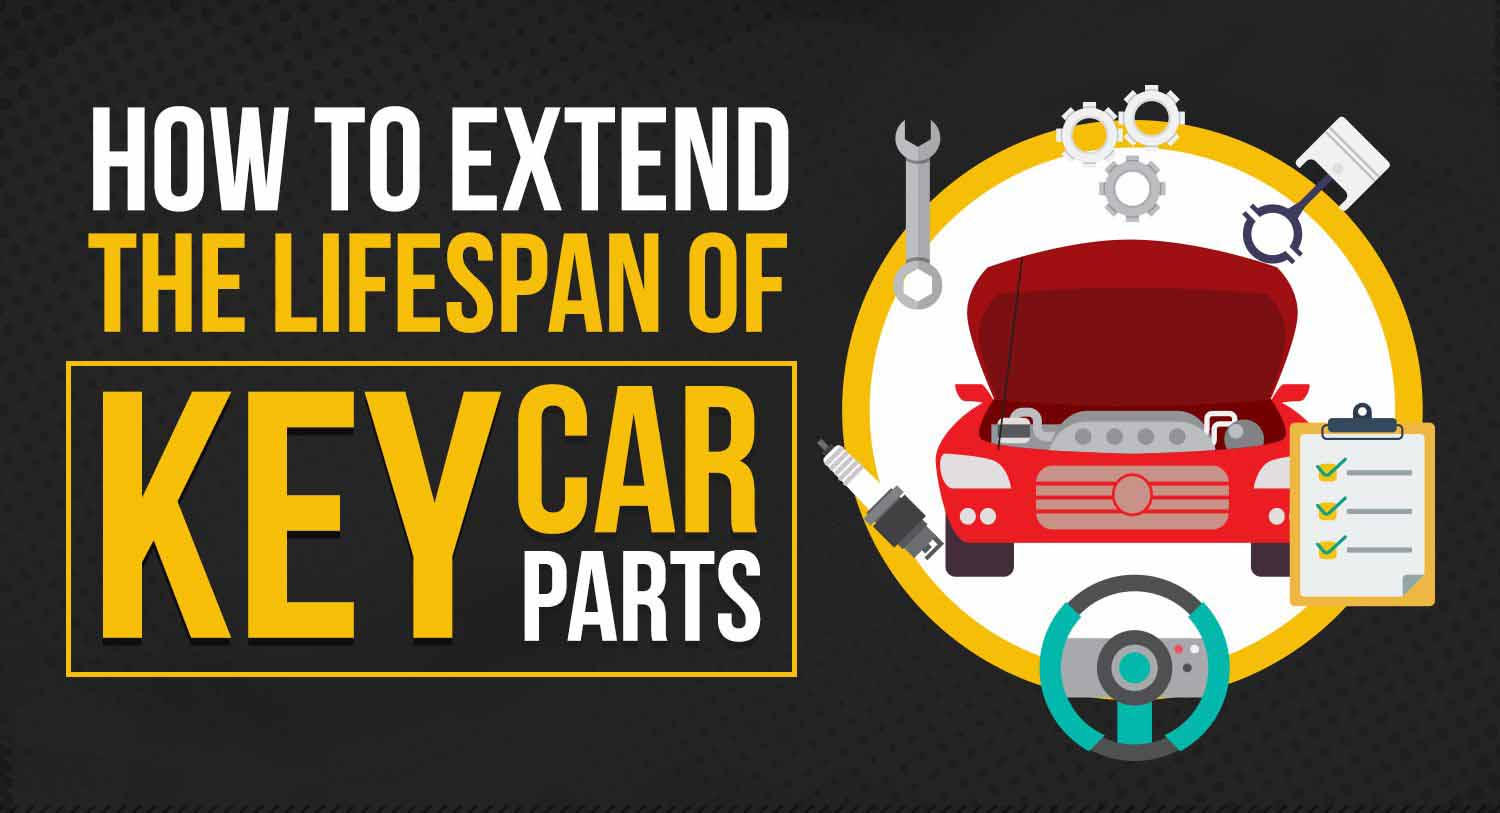 How To Extend The Lifespan Of Key Car Parts [Infographic]